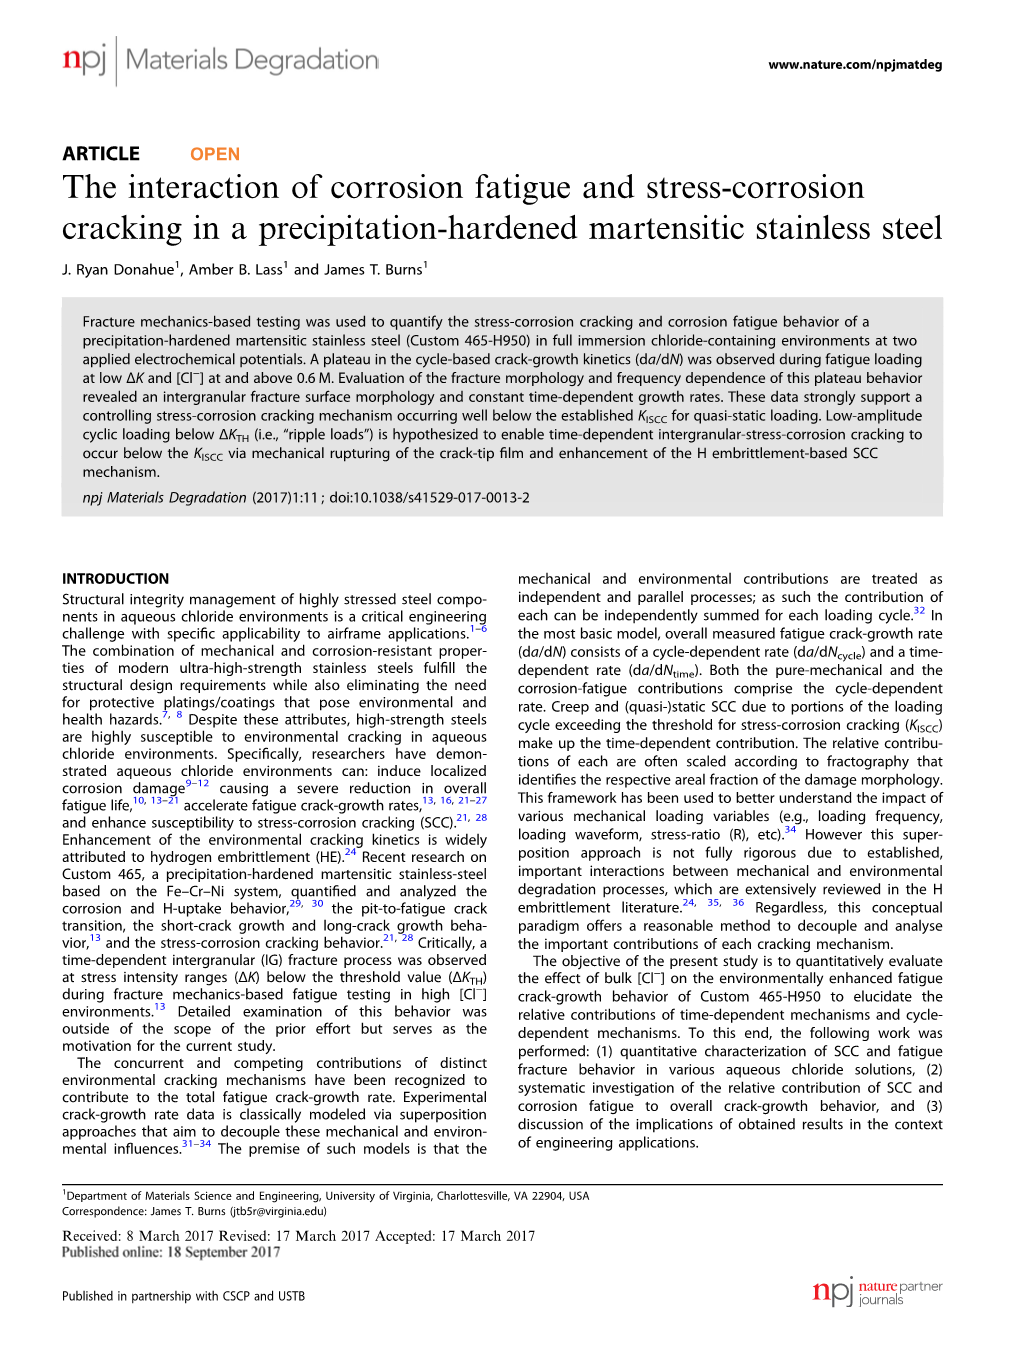 The Interaction of Corrosion Fatigue and Stress-Corrosion Cracking in a Precipitation-Hardened Martensitic Stainless Steel